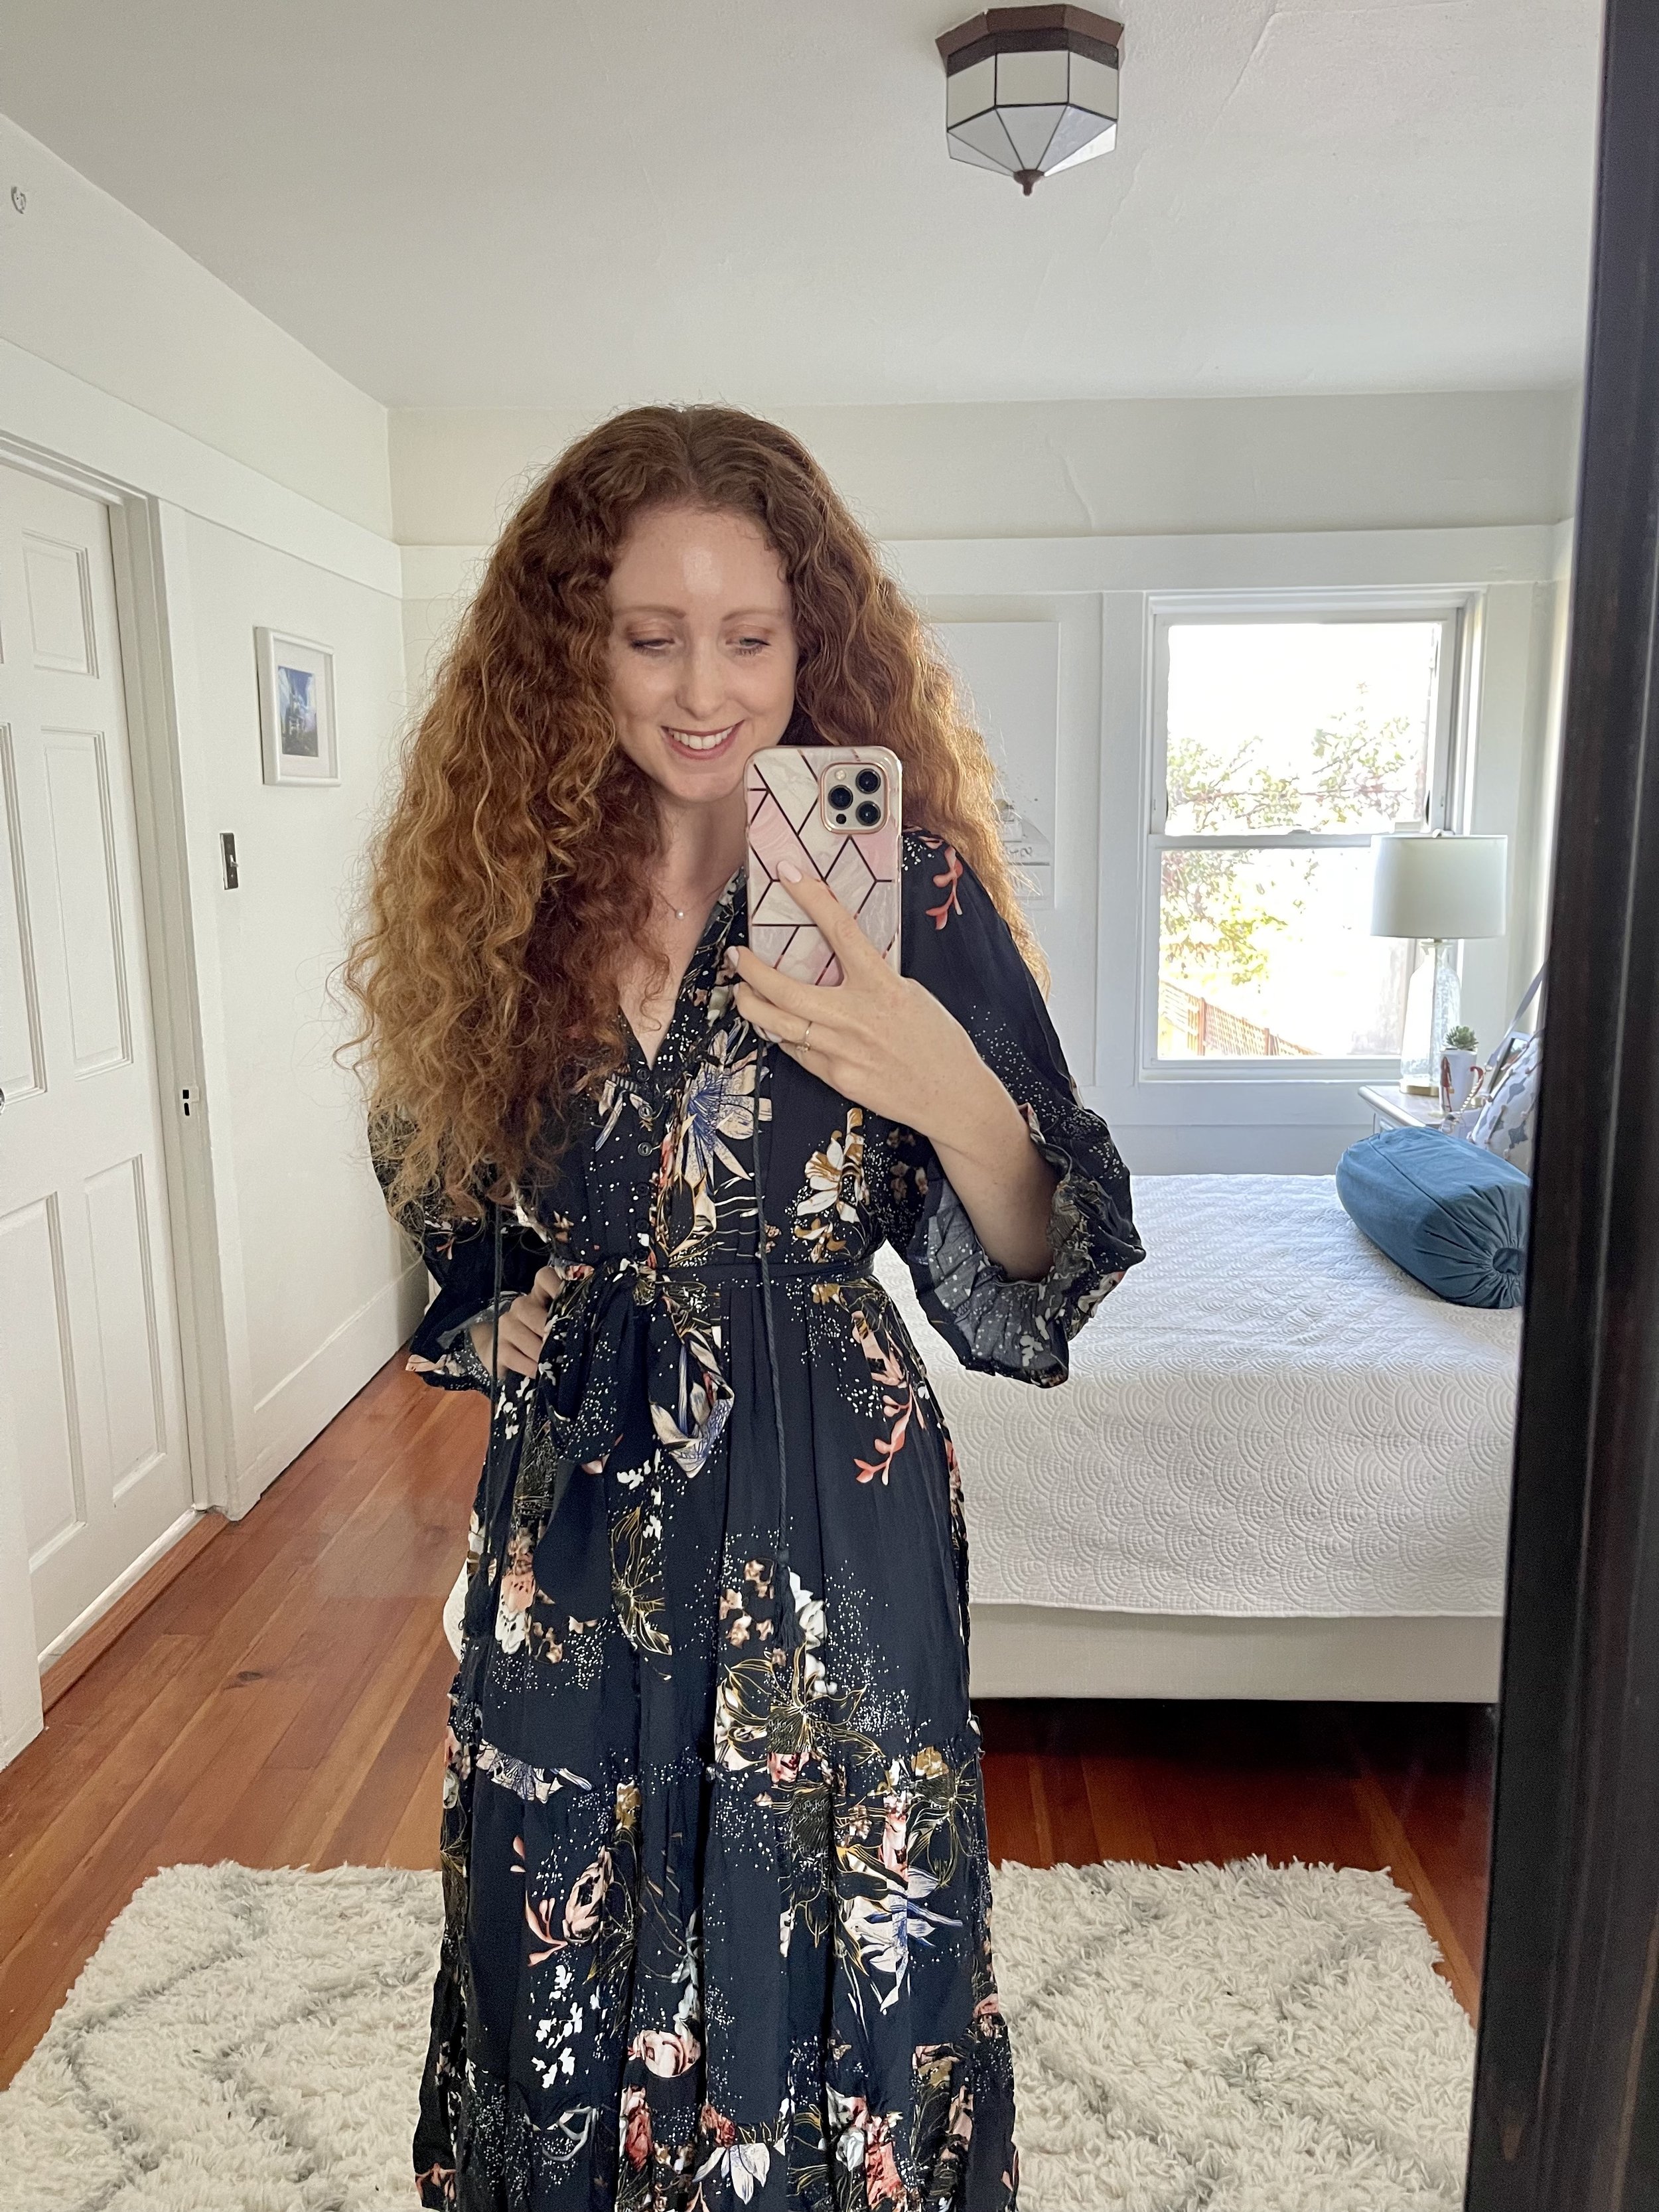 In this Salty Crush Review, you will find detailed Salty Crush Reviews of beautiful boho dresses at affordable prices. I even have a Salty Crush discount code for you! Salty Crush dresses are amazing and I am so excited to share details of my favorit